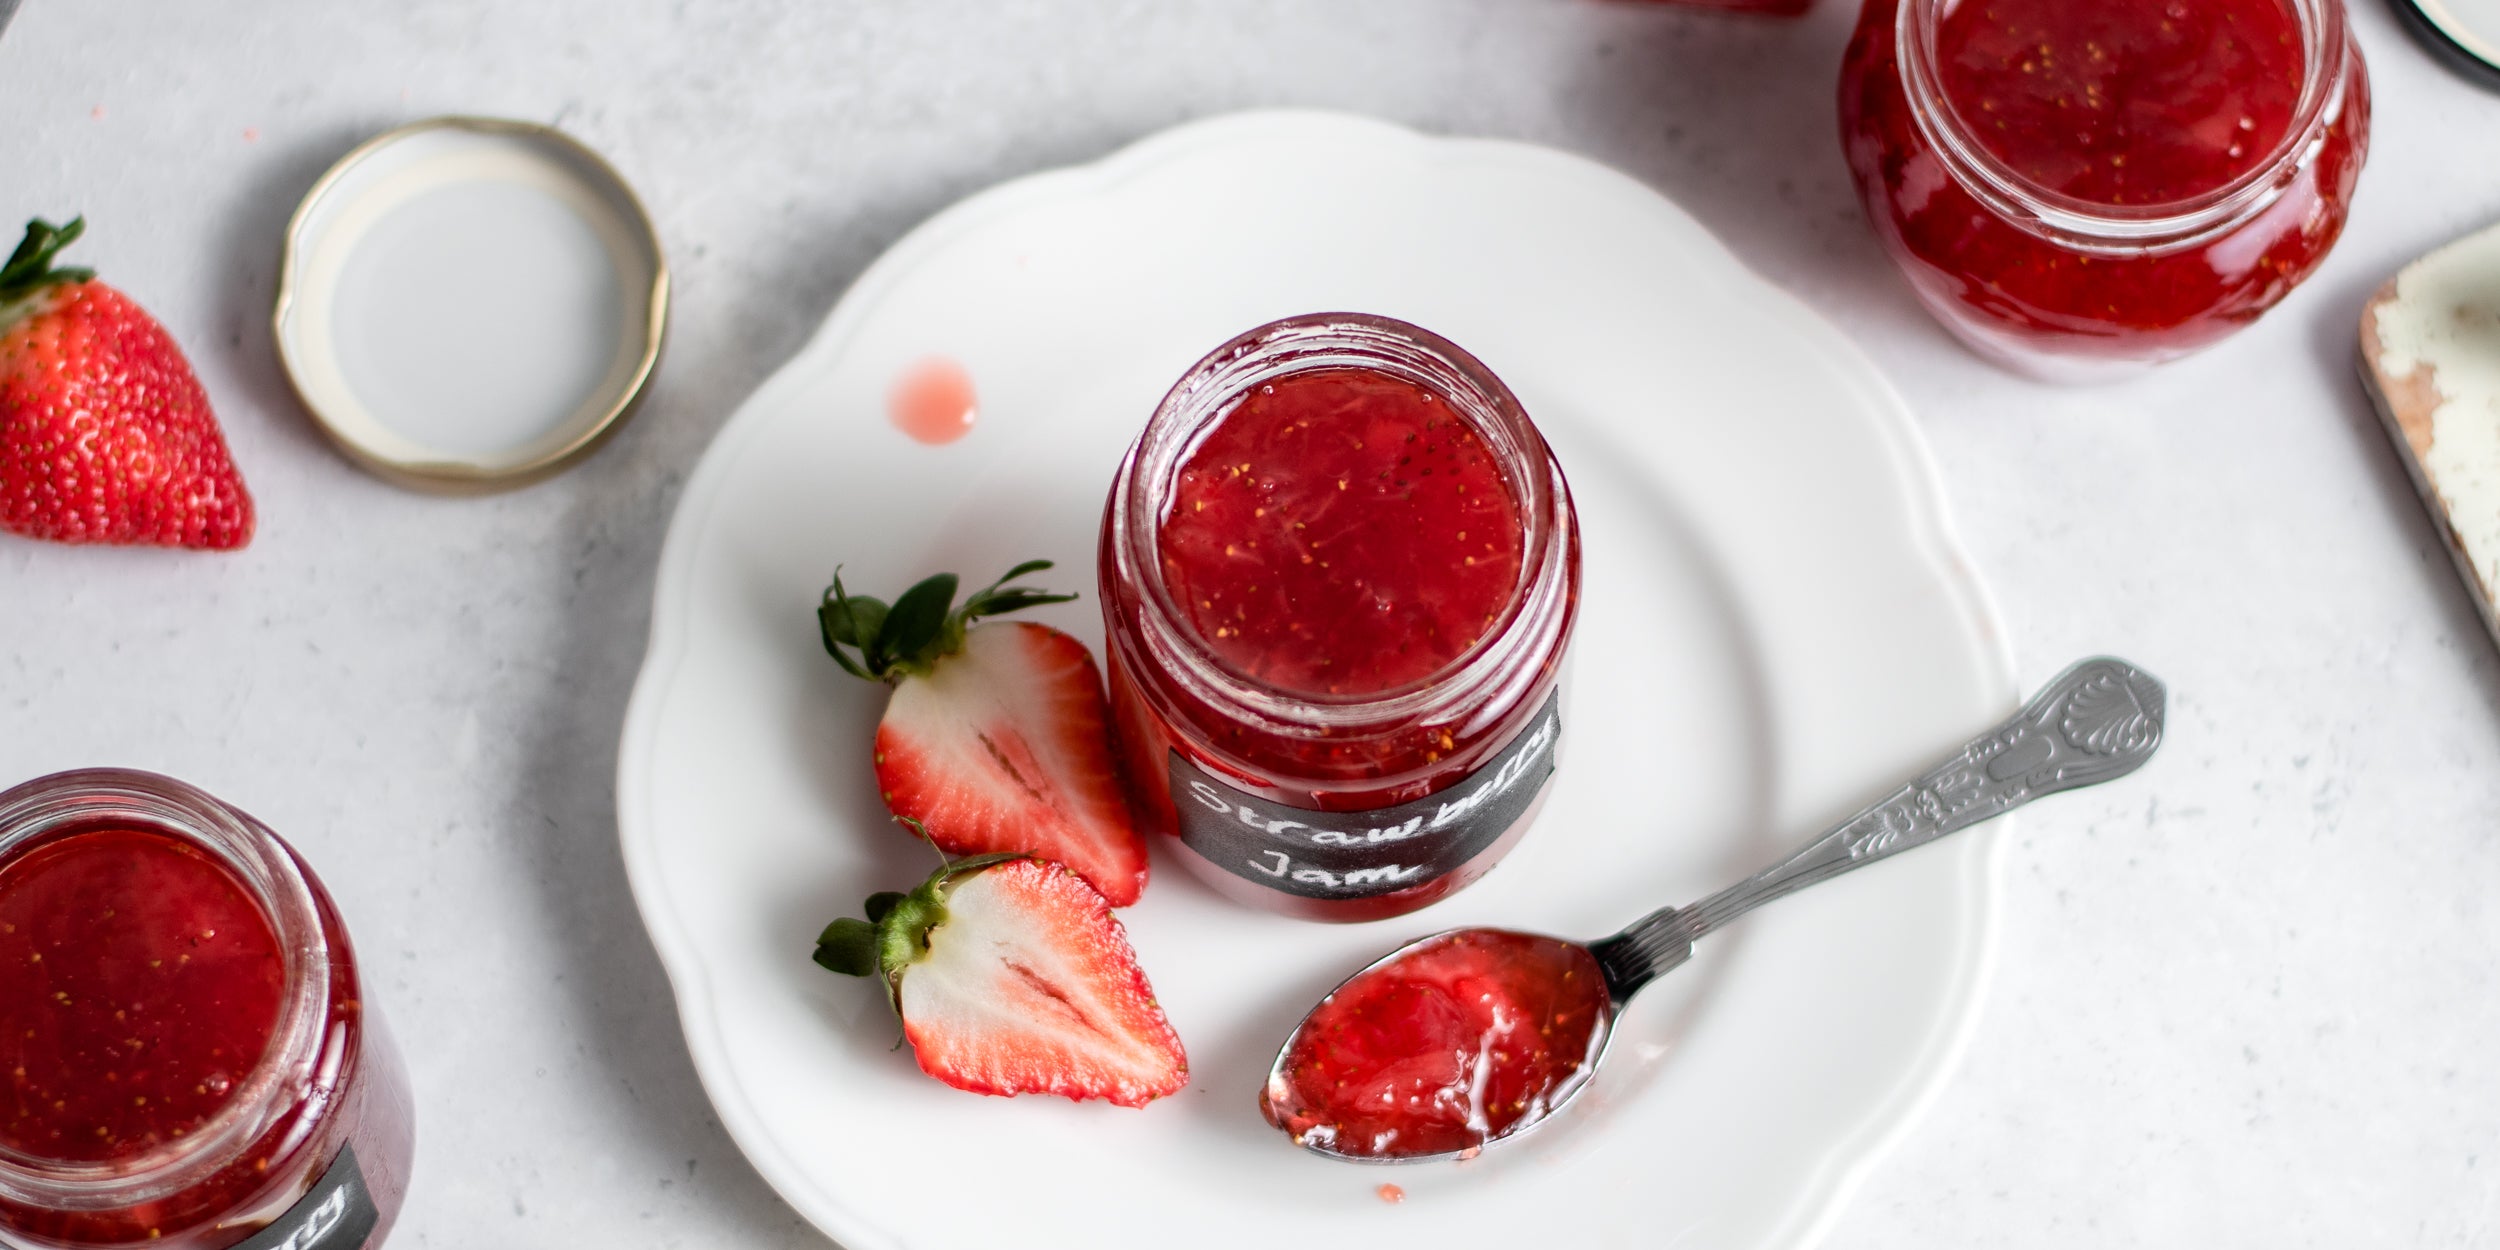 Top view of a jar of Strawberry Jam next to a spoon with a spoonful of jam and sliced strawberries